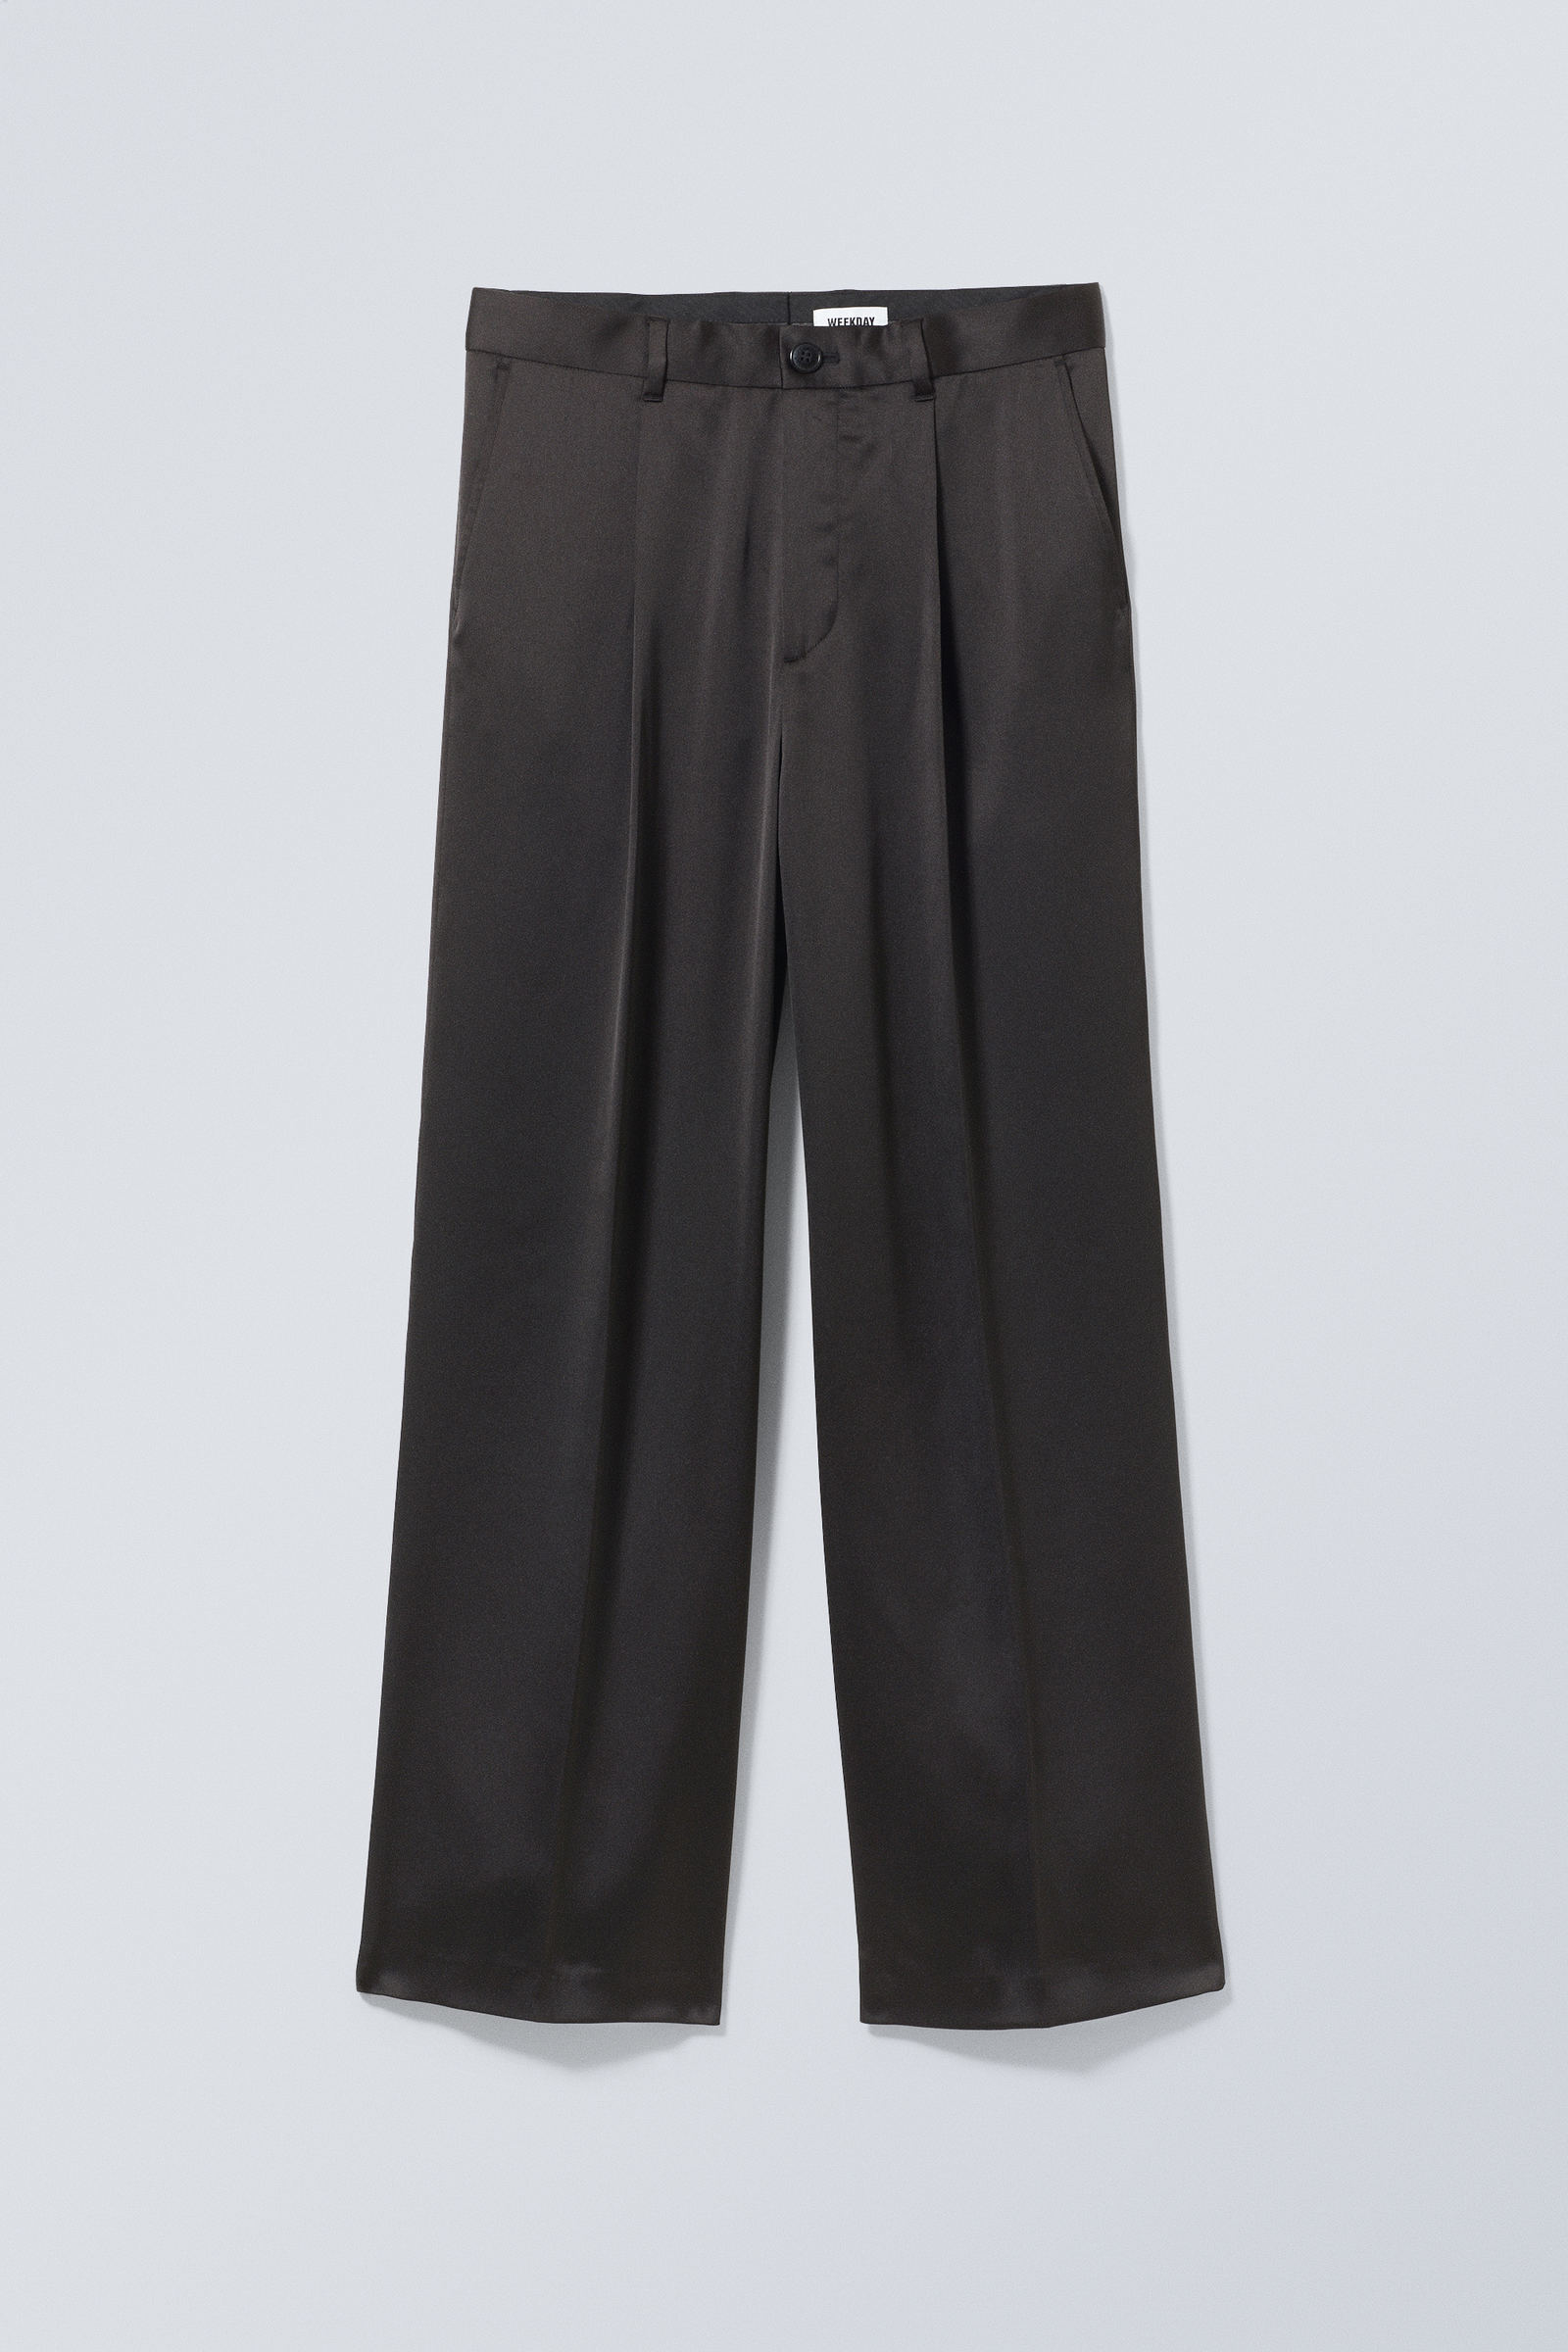 Black - Uno Loose Shiny Trousers - 1